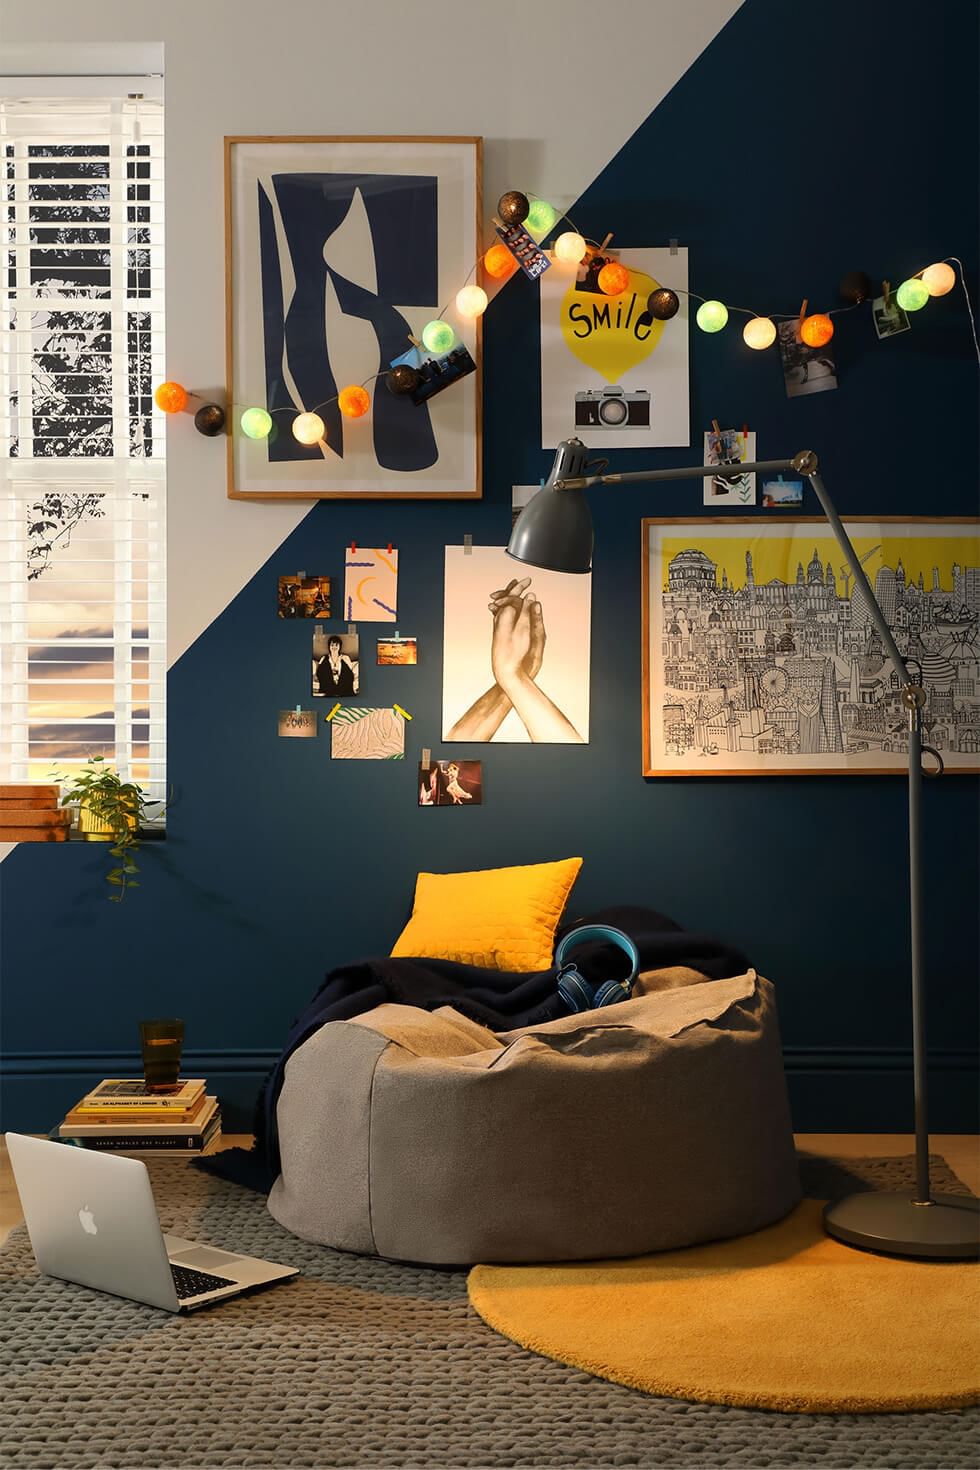 Chill out zone in a shared bedroom with a bean bag and artwork